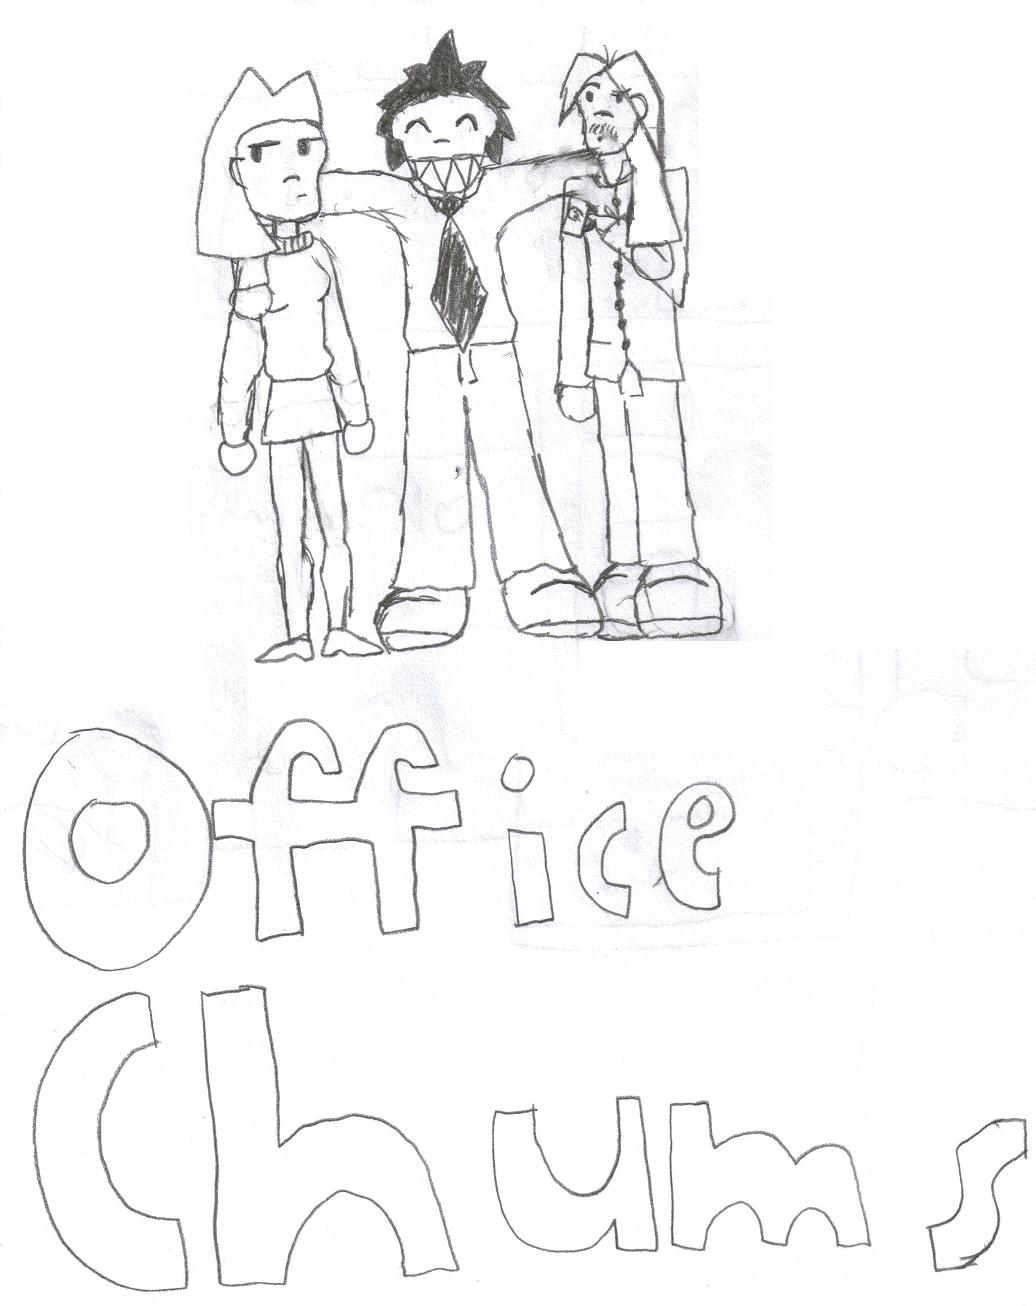 Office Chums - Cover by Raz